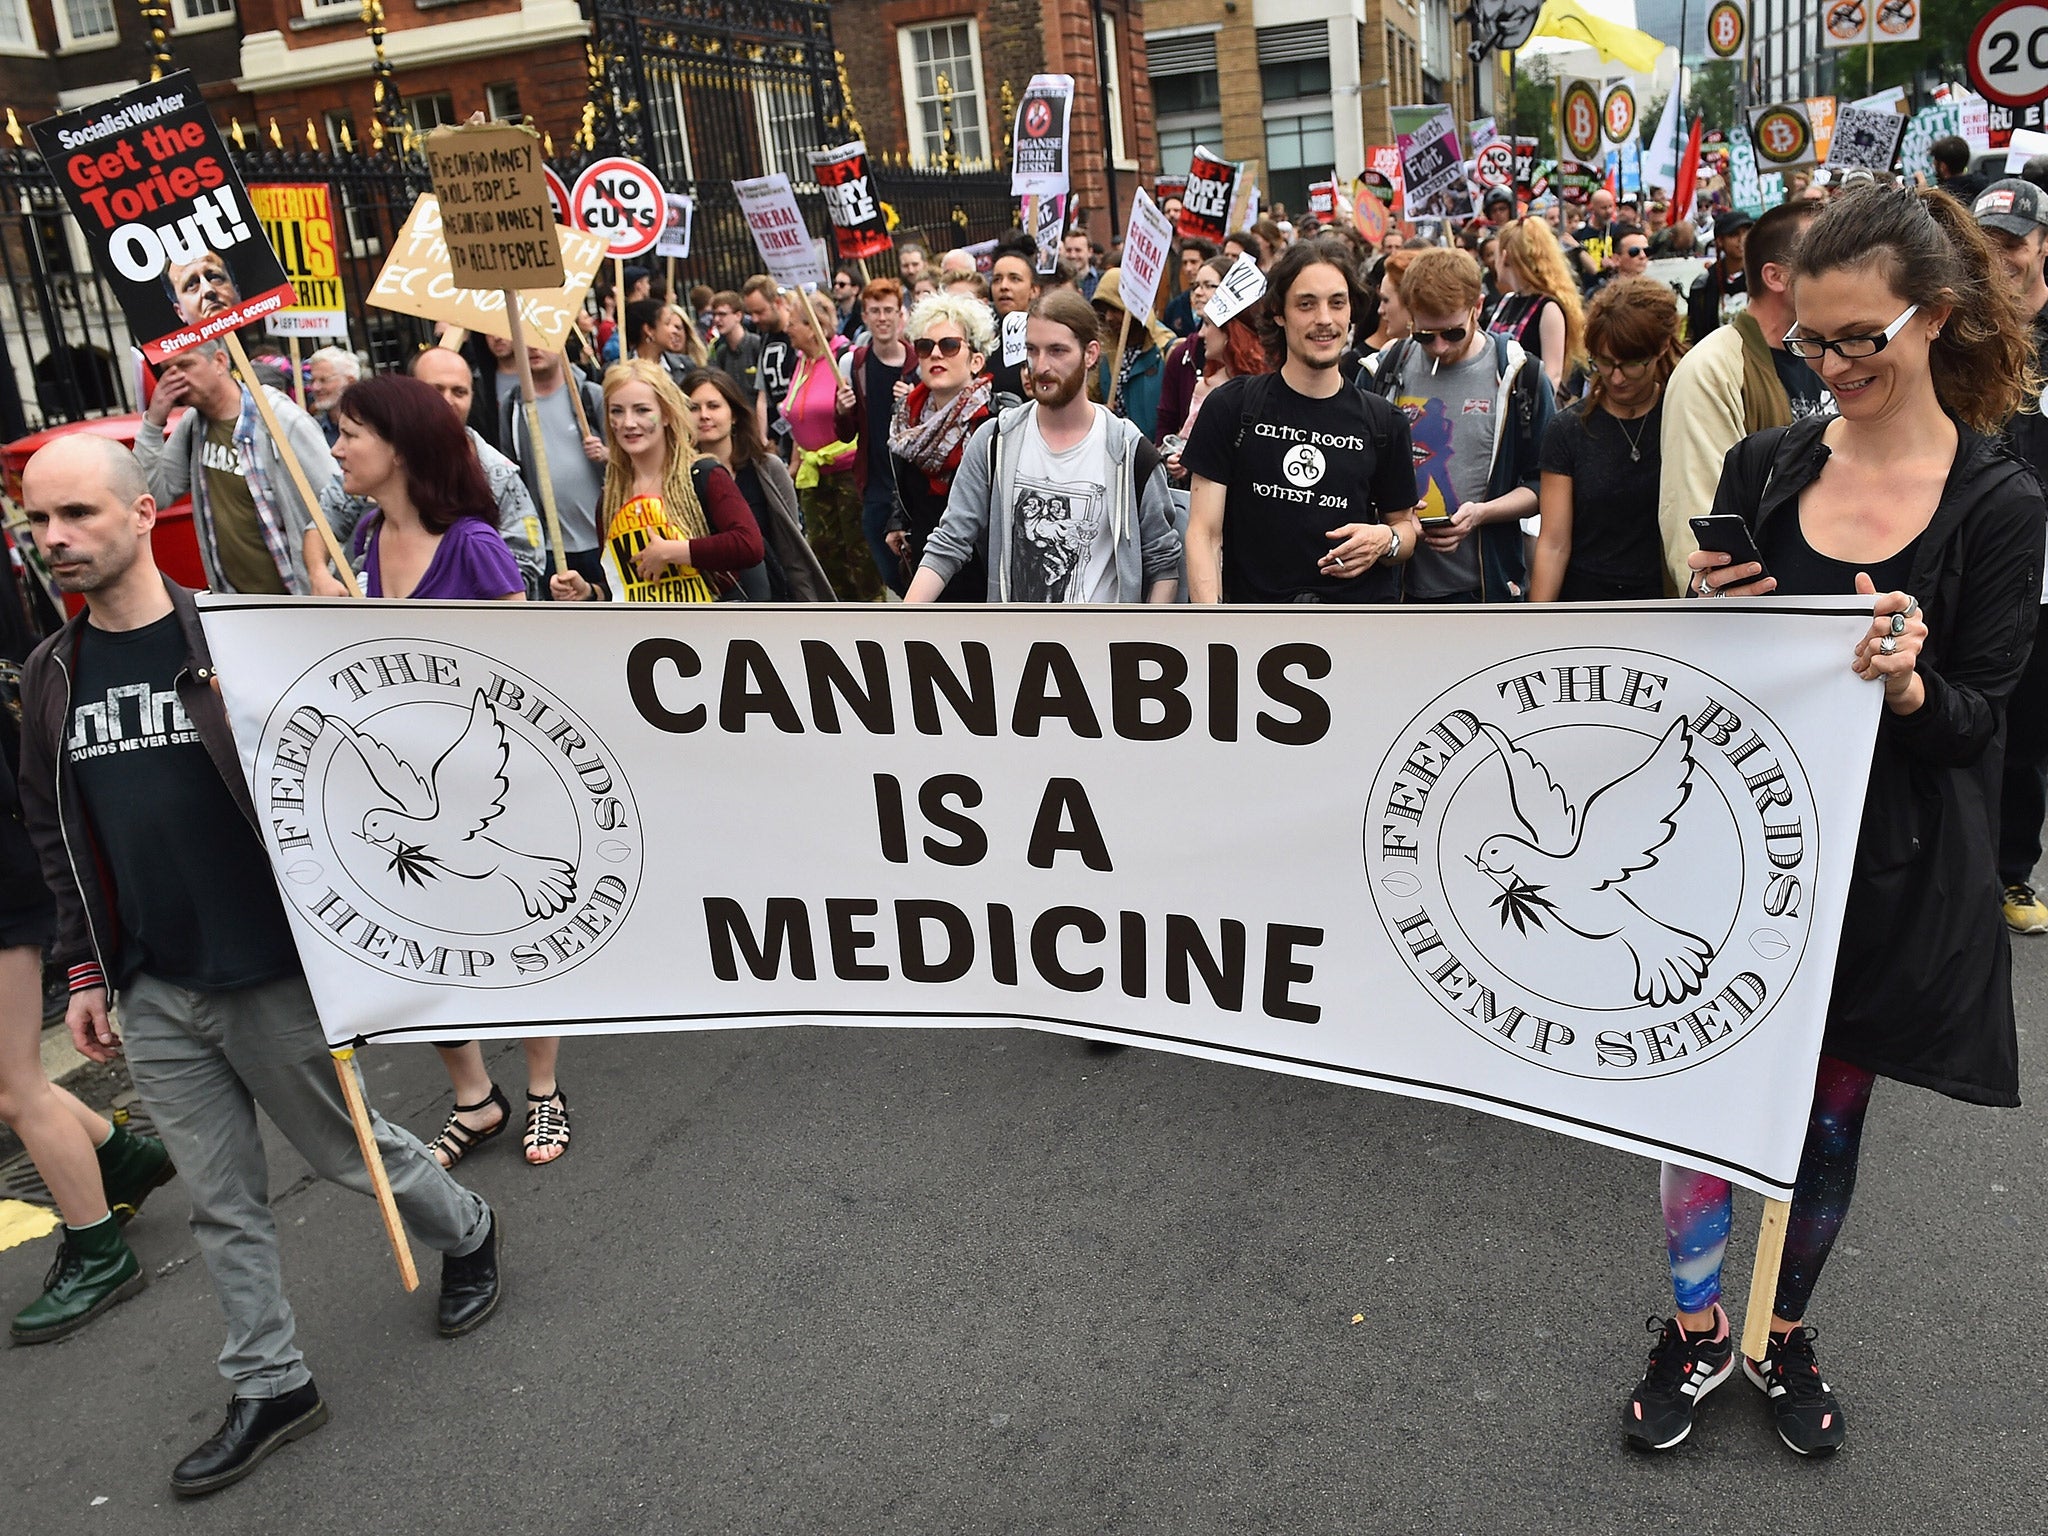 Protesters carry a banner in support of cannabis legalisation through central London during a demonstration in London last month (Getty)